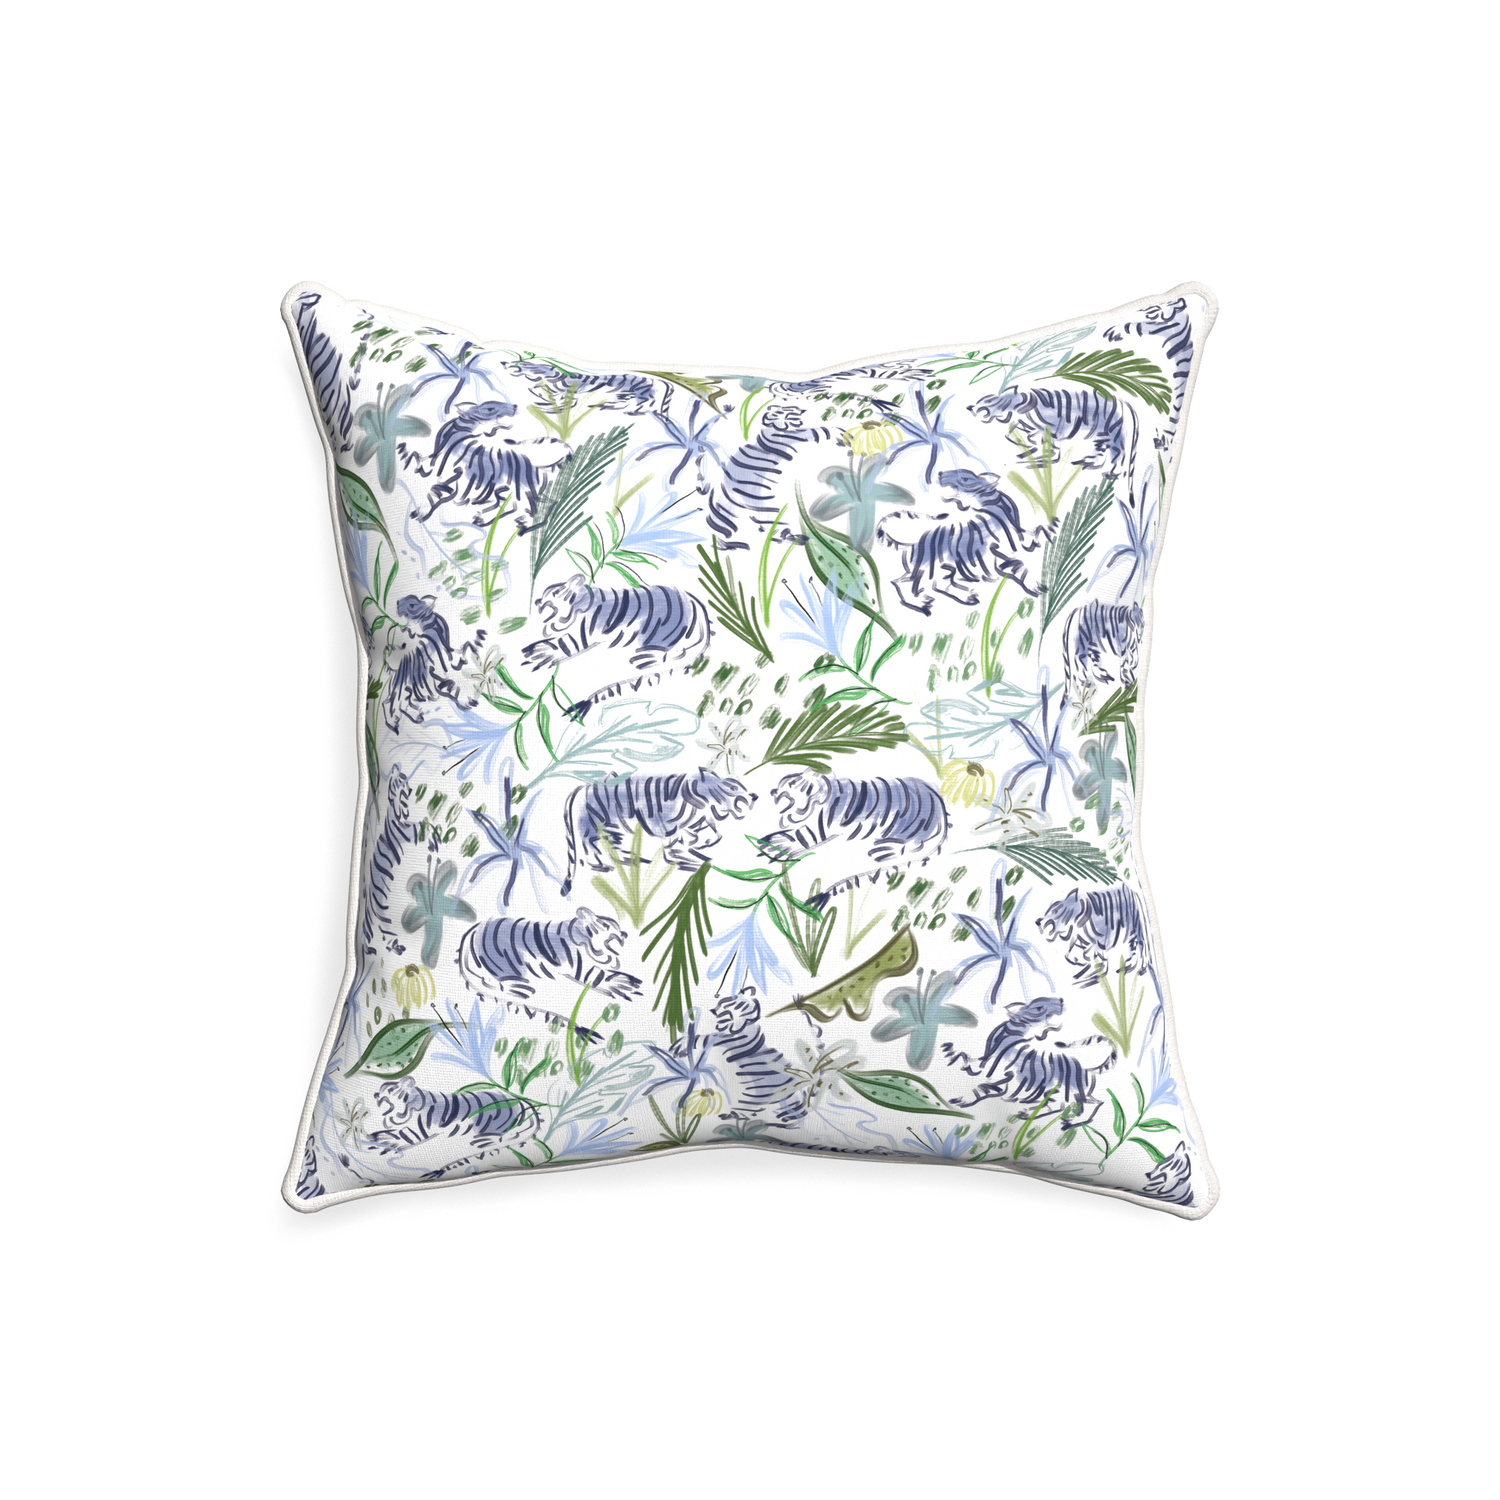 20-square frida green custom green tigerpillow with snow piping on white background